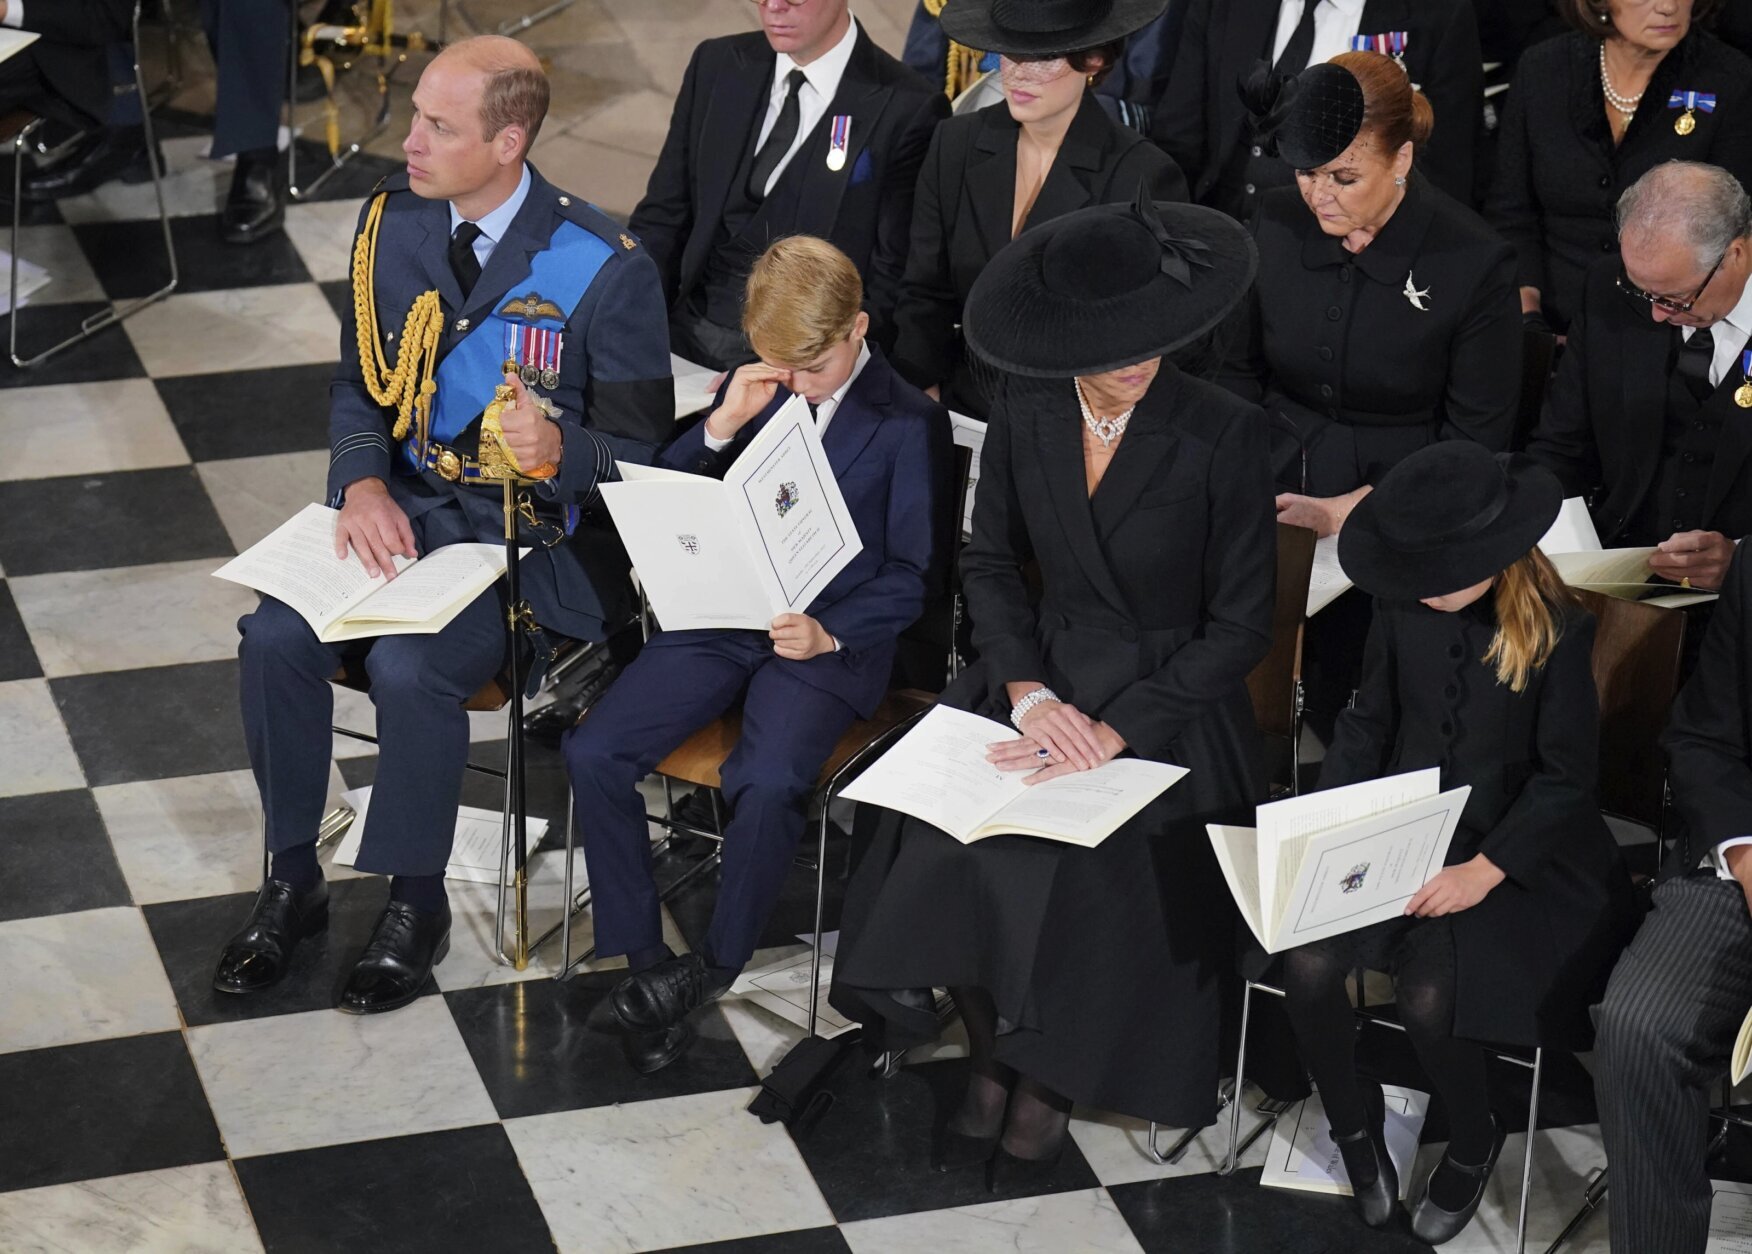 From left, Prince Charles, Prince George, Catherine, the Princess of Wales and Princess Charlotte attend the funeral service of Queen Elizabeth II at Westminster Abbey in central London, Monday Sept. 19, 2022. The Queen, who died aged 96 on Sept. 8, will be buried at Windsor alongside her late husband, Prince Philip, who died last year. (Dominic Lipinski/Pool via AP)